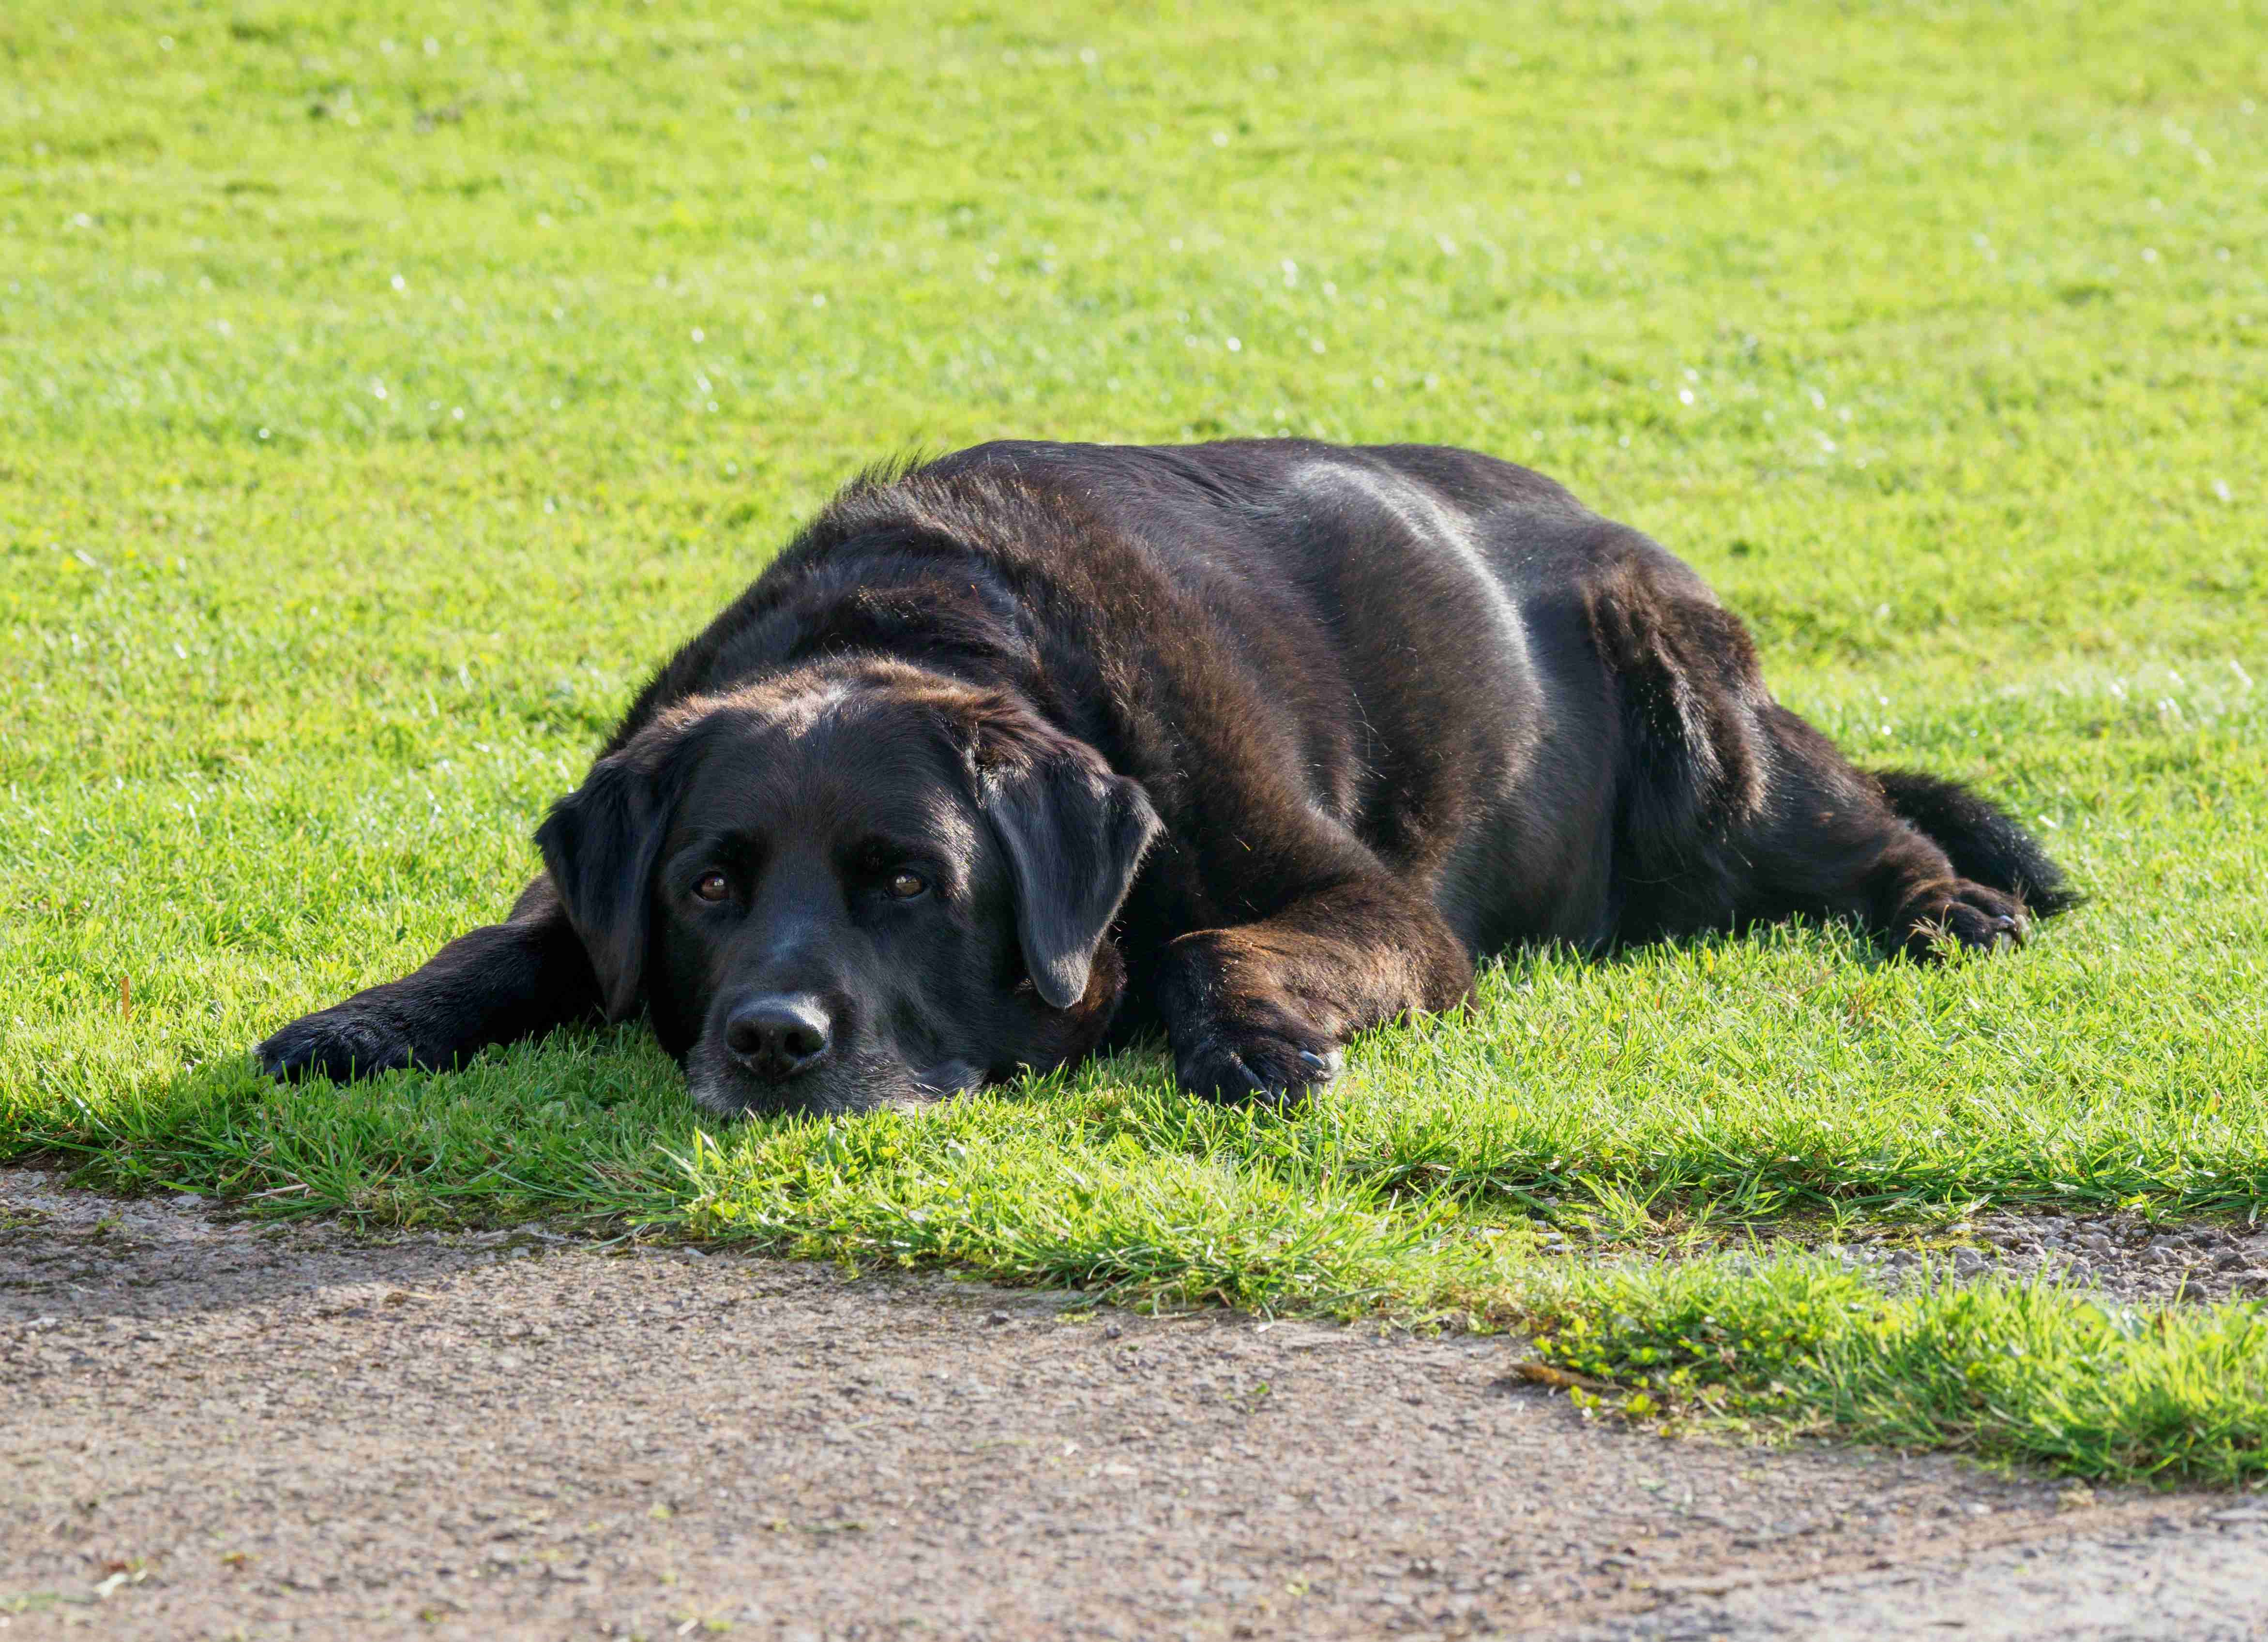 Labrador Retriever Heat Cycle: Signs and Symptoms to Watch Out For